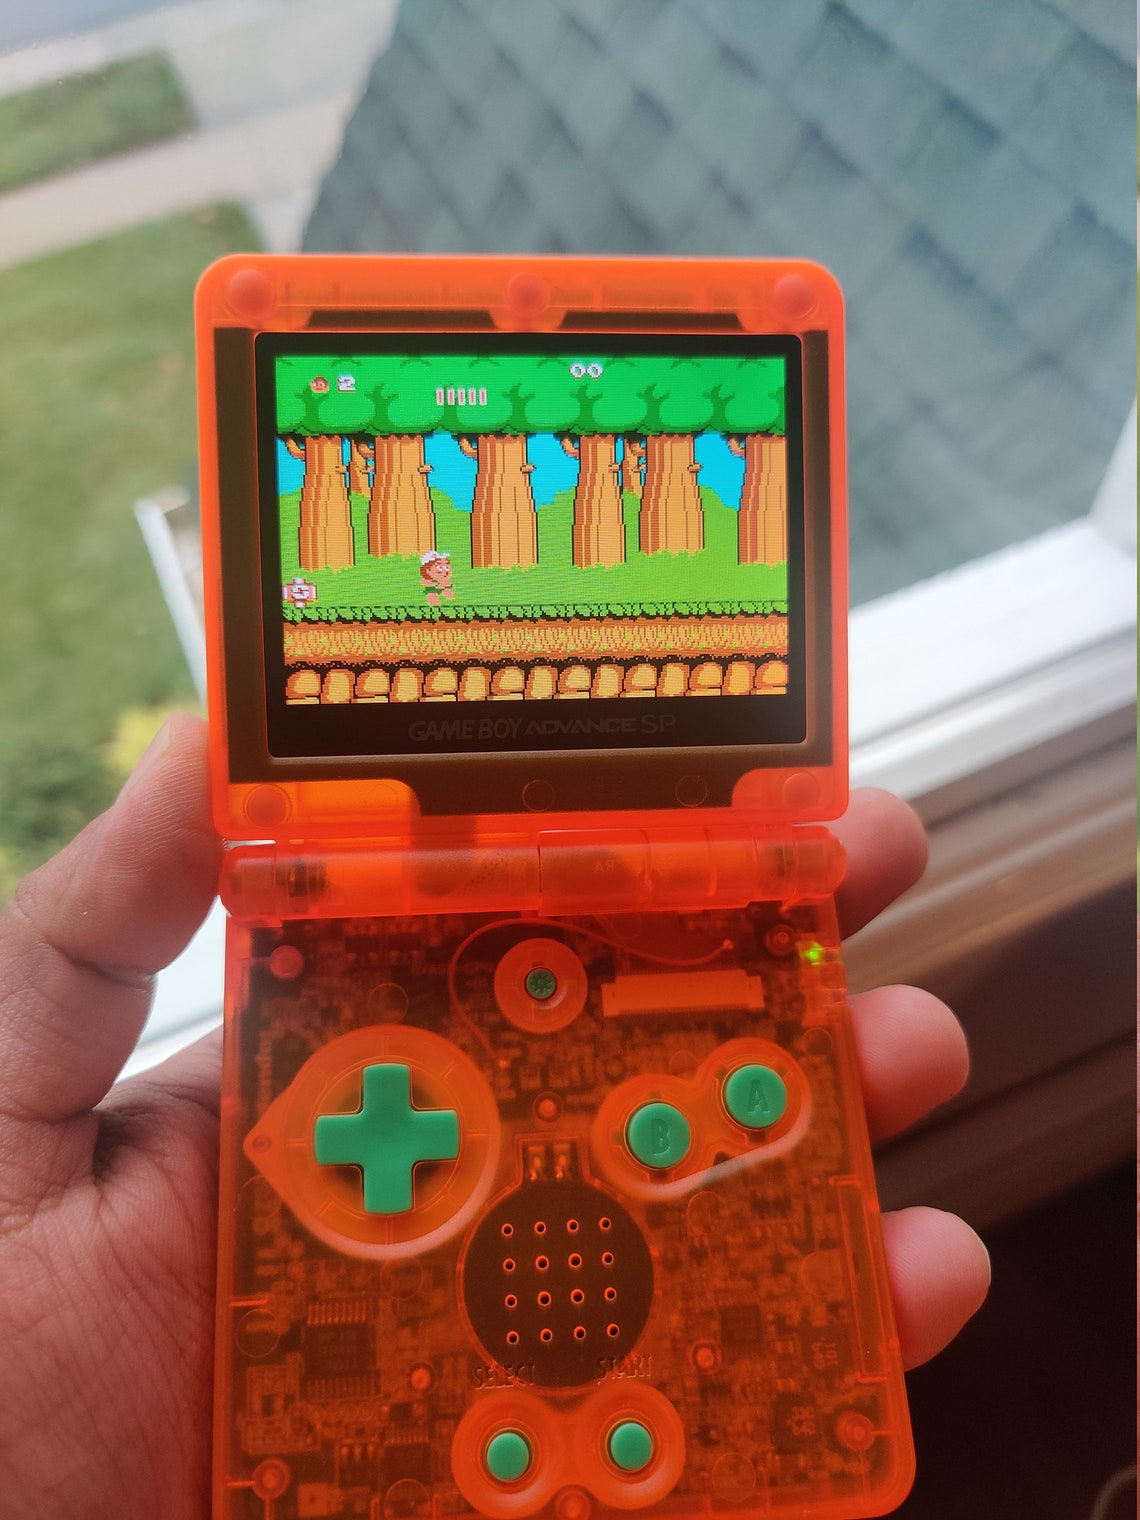 Gameboy Advance SP Transparent Orange with Lime Green 